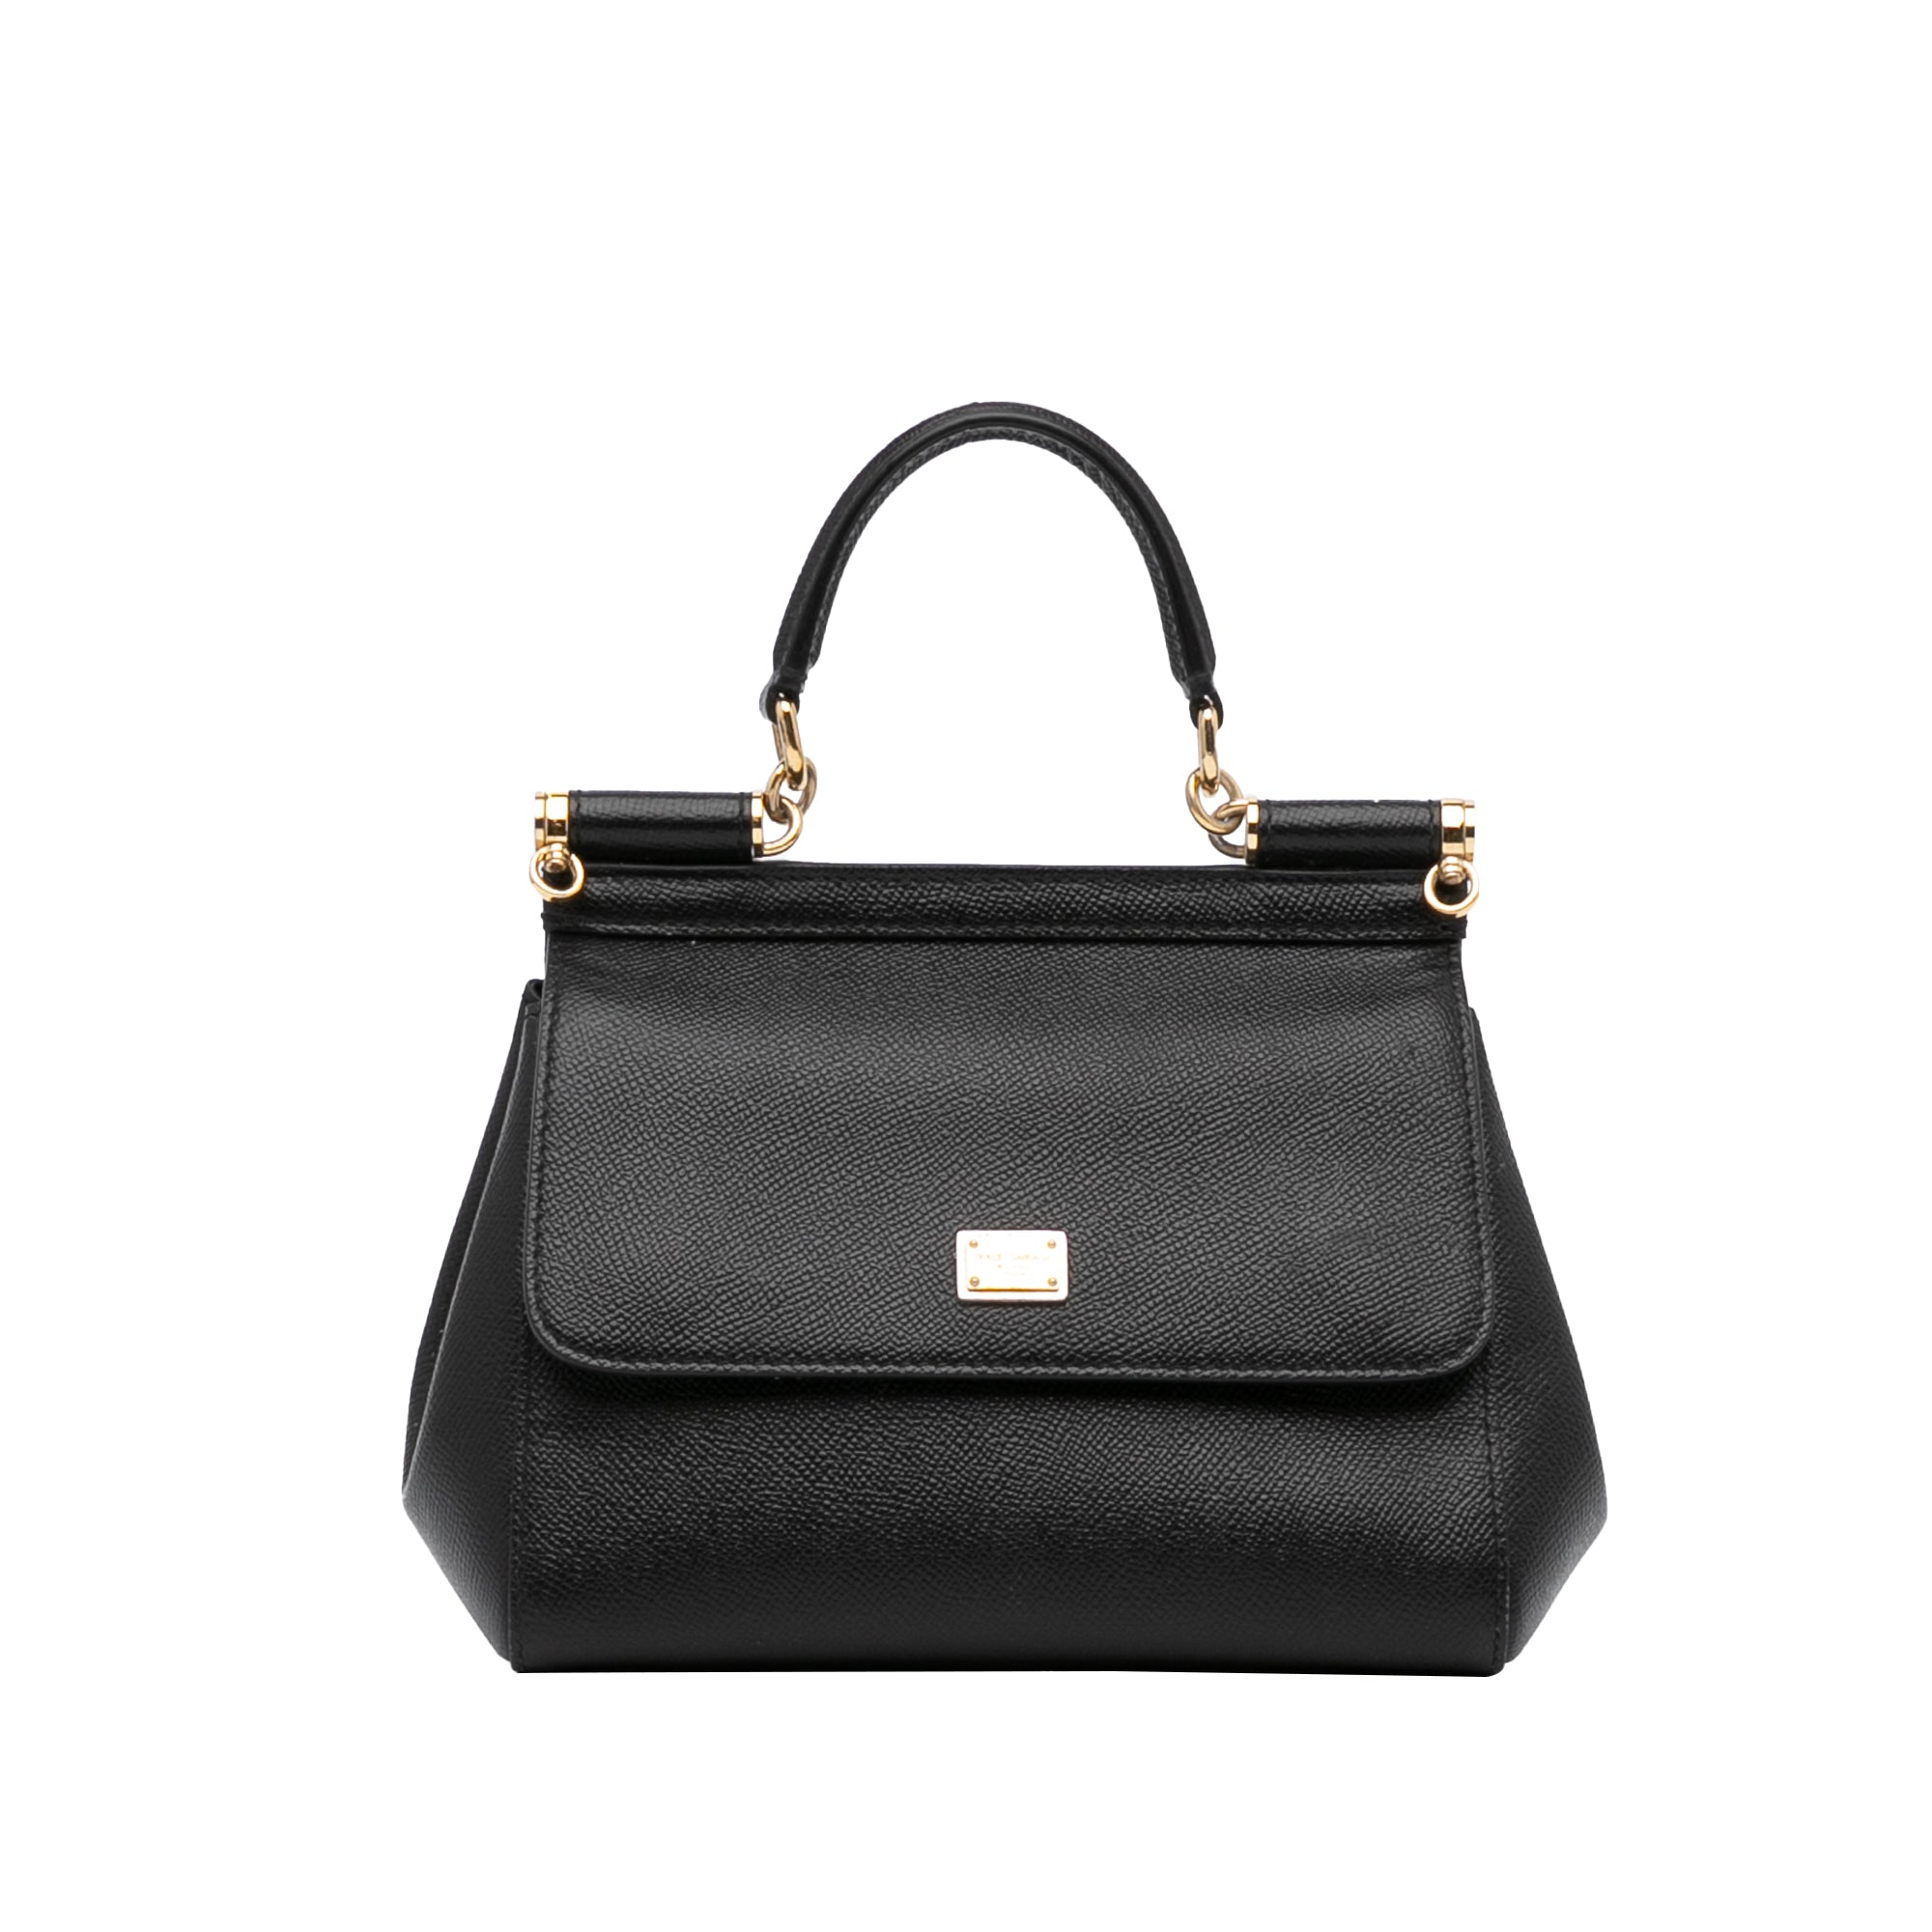 Dolce & Gabbana Sicily Small Leather Top-Handle Bag